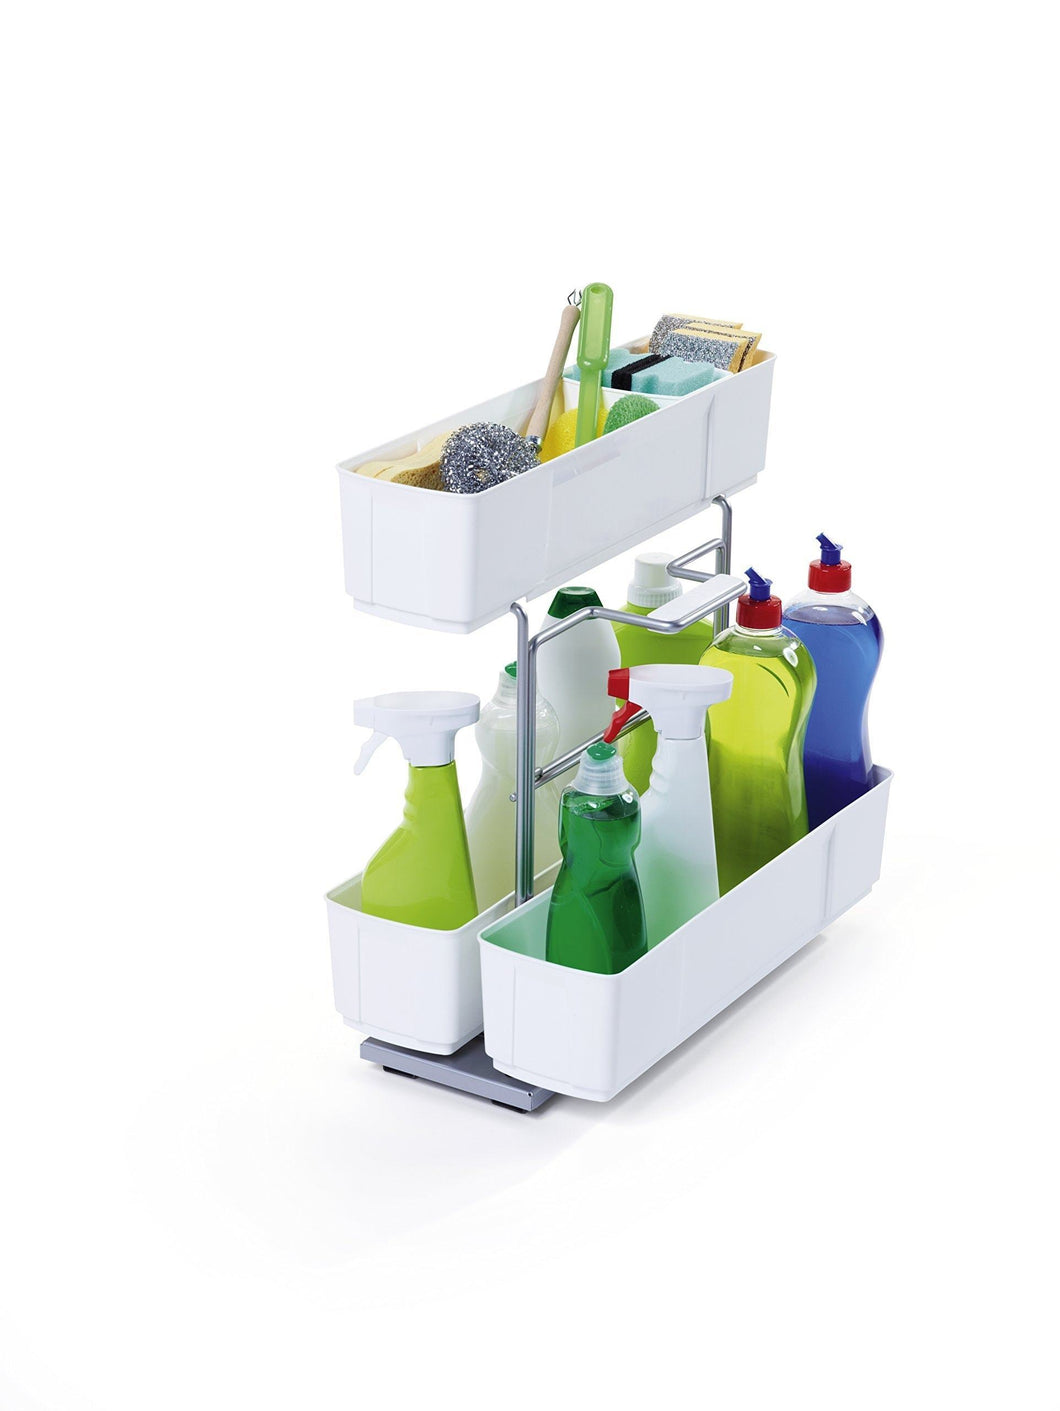 CleaningAGENT Under Sink Organizer | Chrome Steel and White | Sliding Pull-Out Base Cabinet Storage | Removable Carrying Caddy | Dishwasher Safe | Easy Install